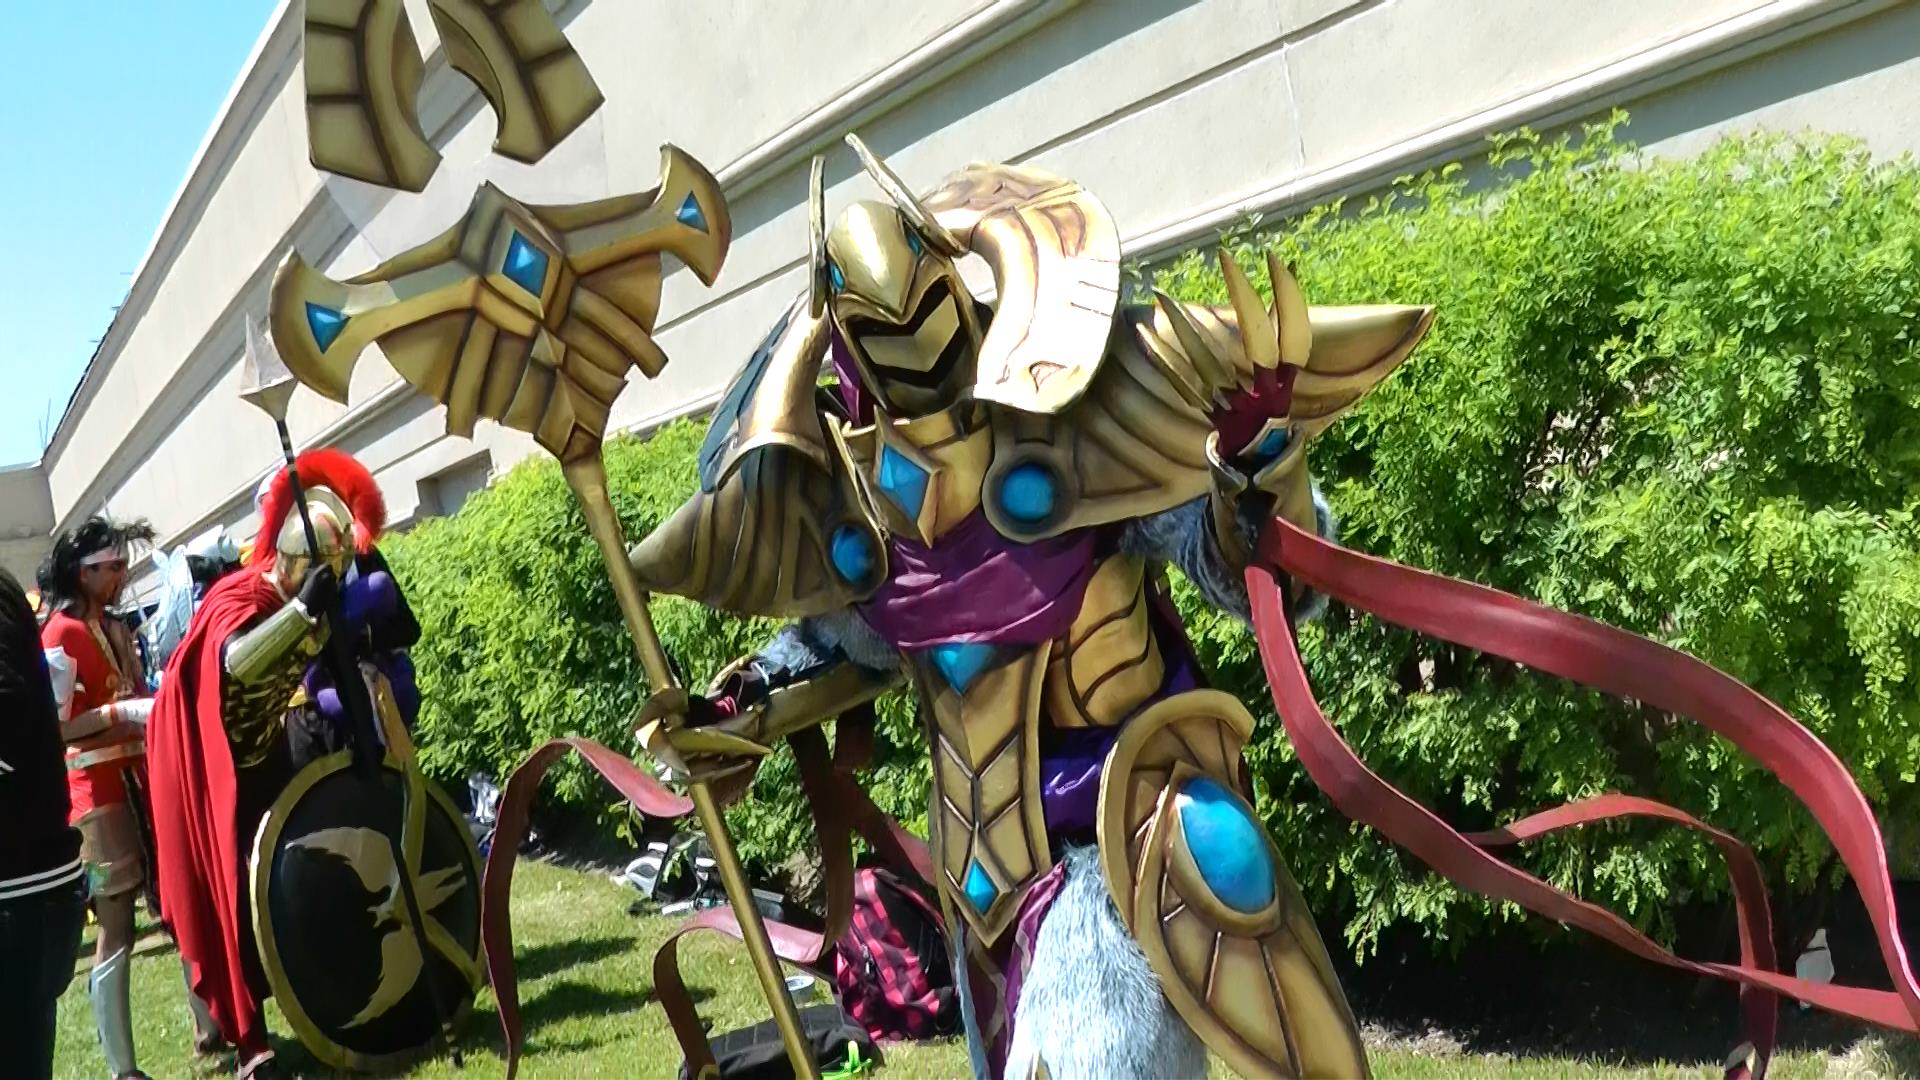  Azir from League of Legends blew us away! He didn't want to talk about how much his cosplay cost to build but it looks worth it. 